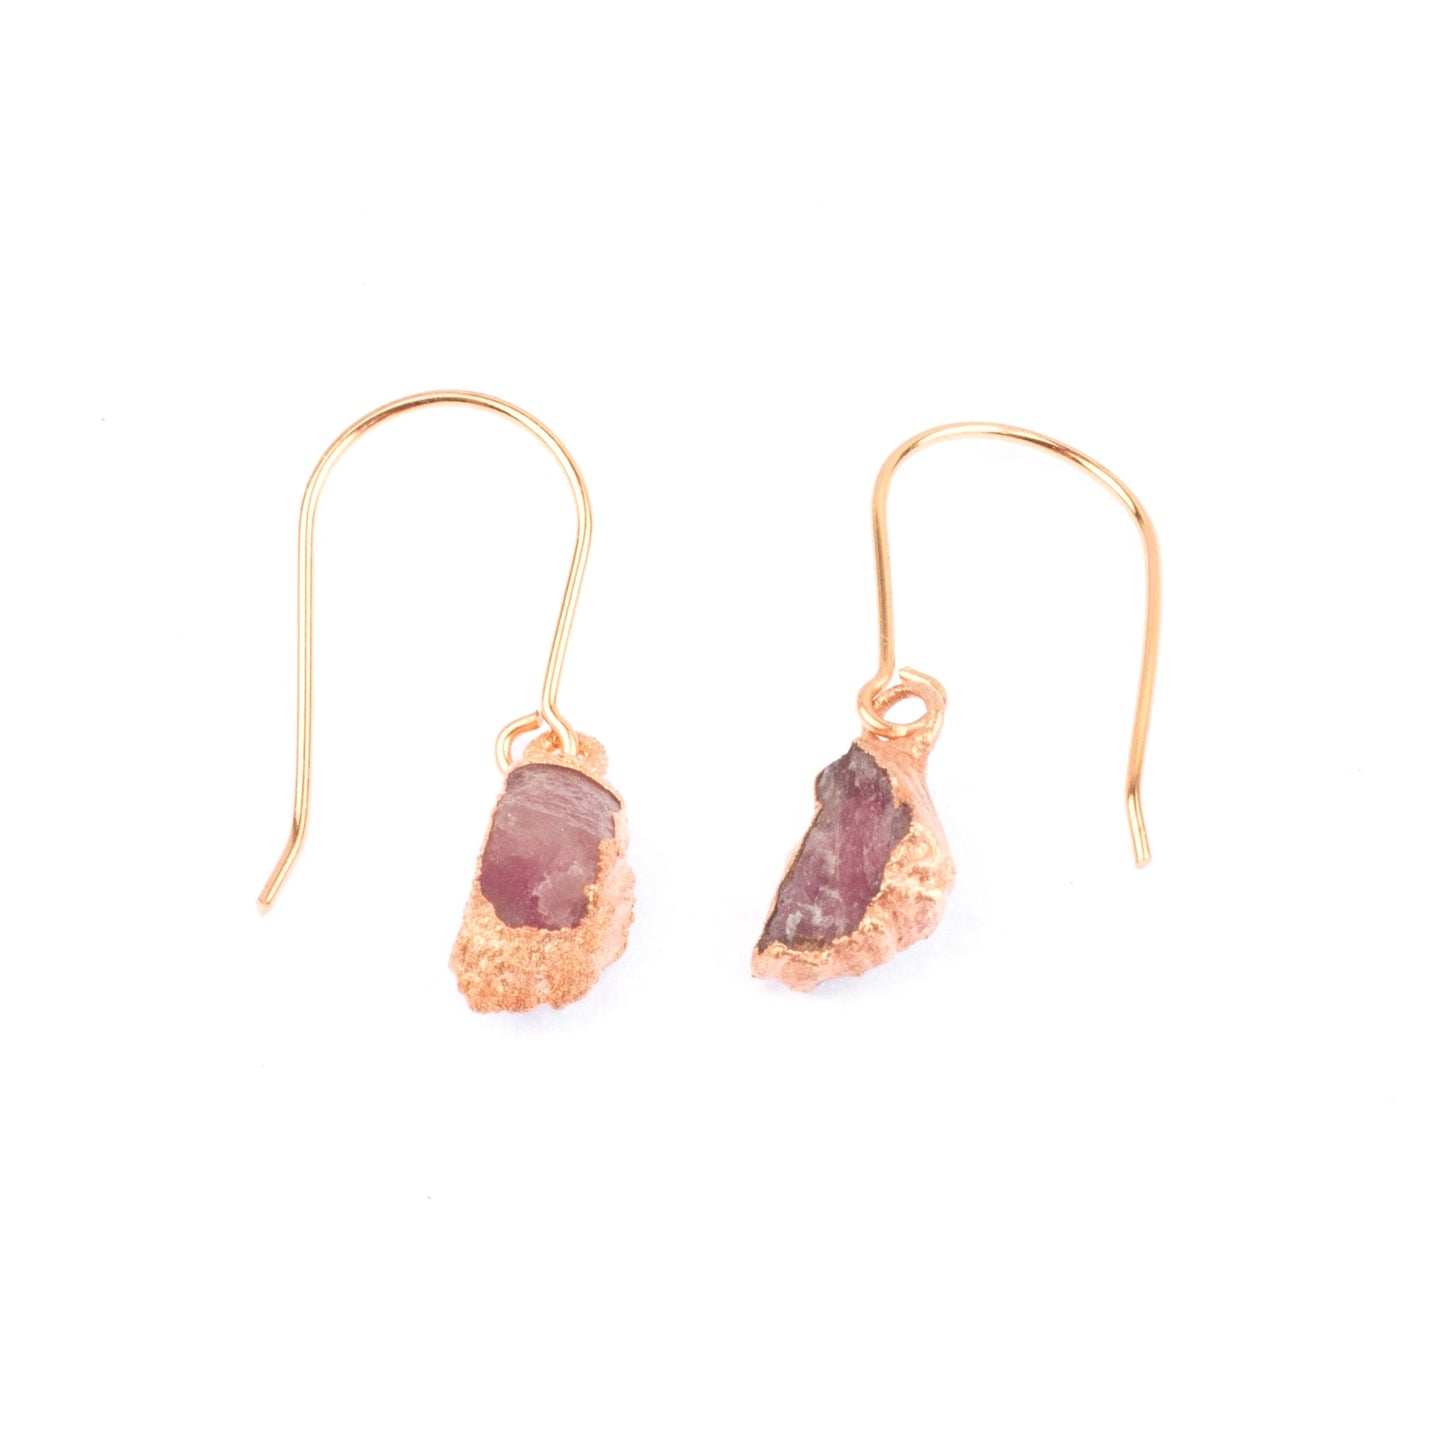 Large Pink Tourmaline Short Dangly Earrings (October birthstone)